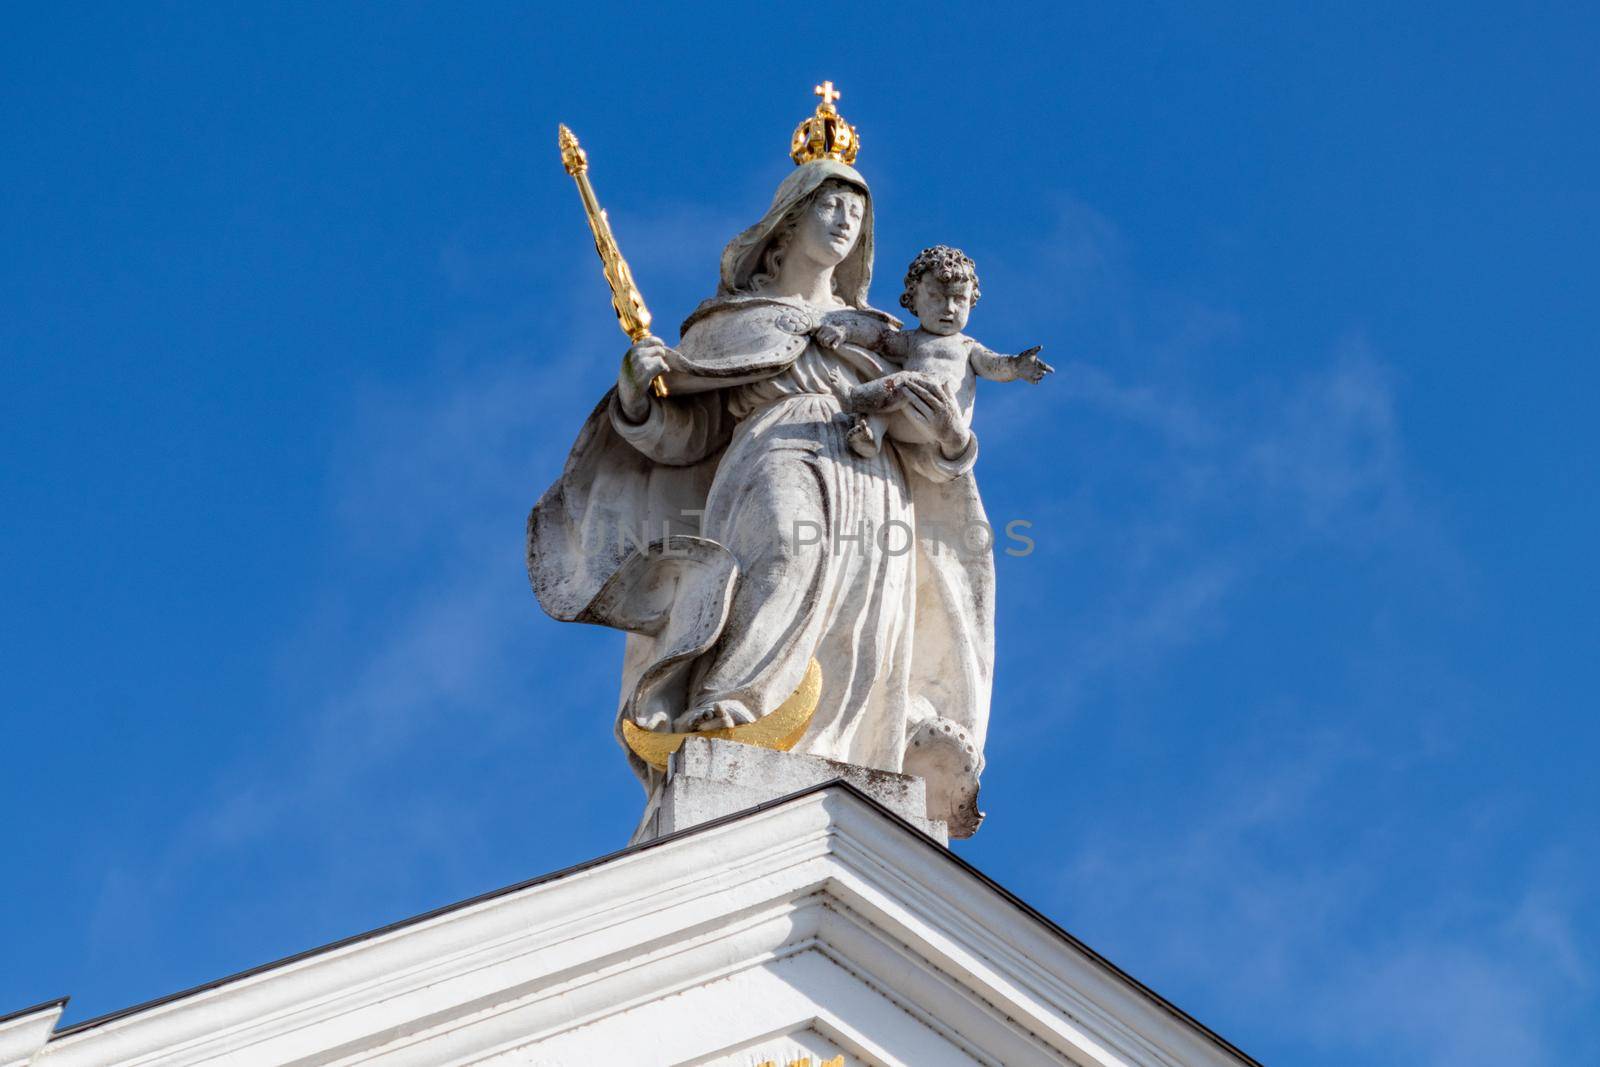 Statue with golden scepter and crown on St. Stephen's Cathedral (Dom St. Stephan) in Passau, Bavaria, Germany by reinerc